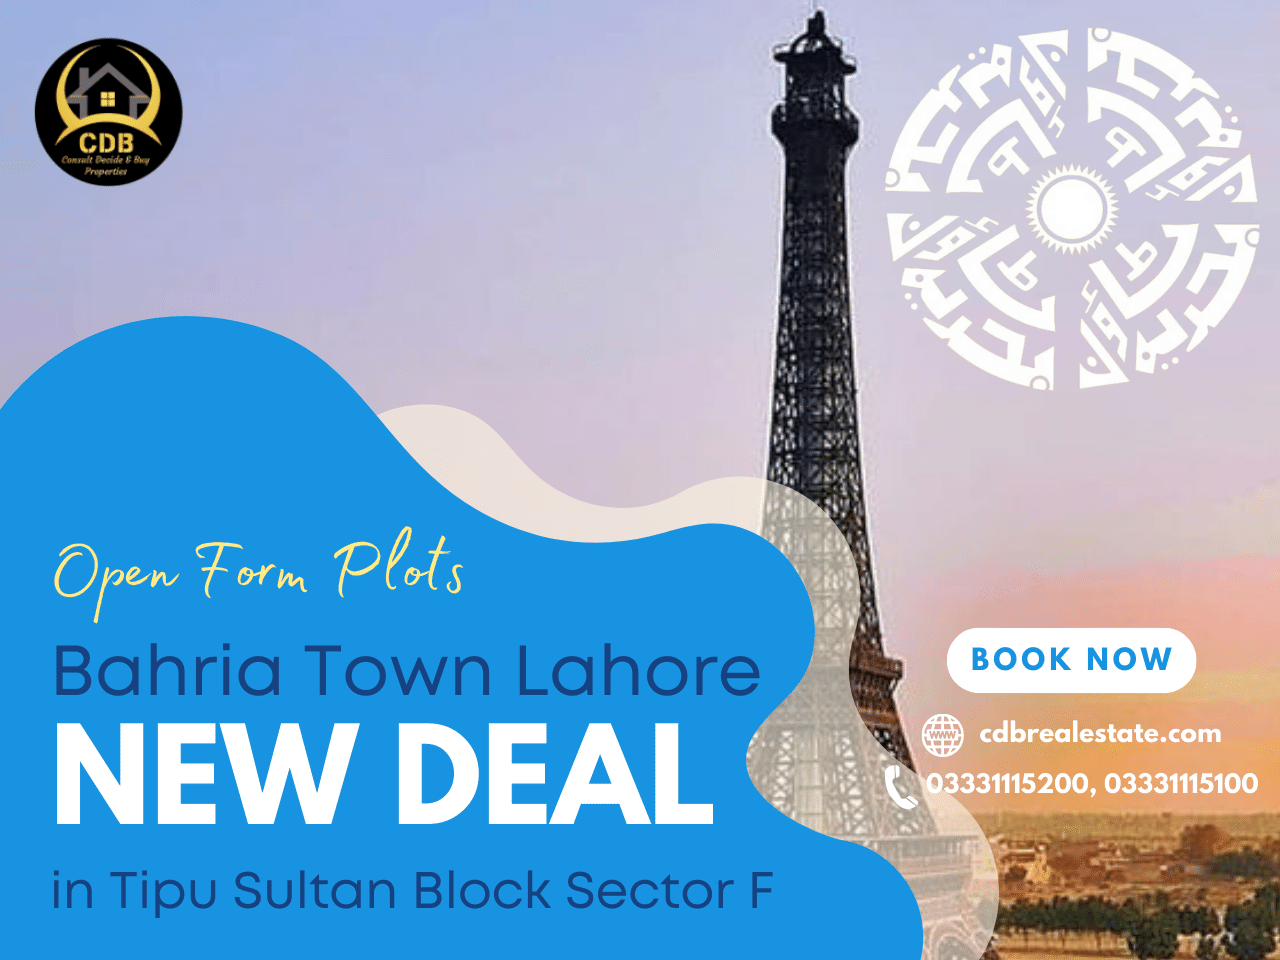 New Deal in Tipu Sultan Block Sector F